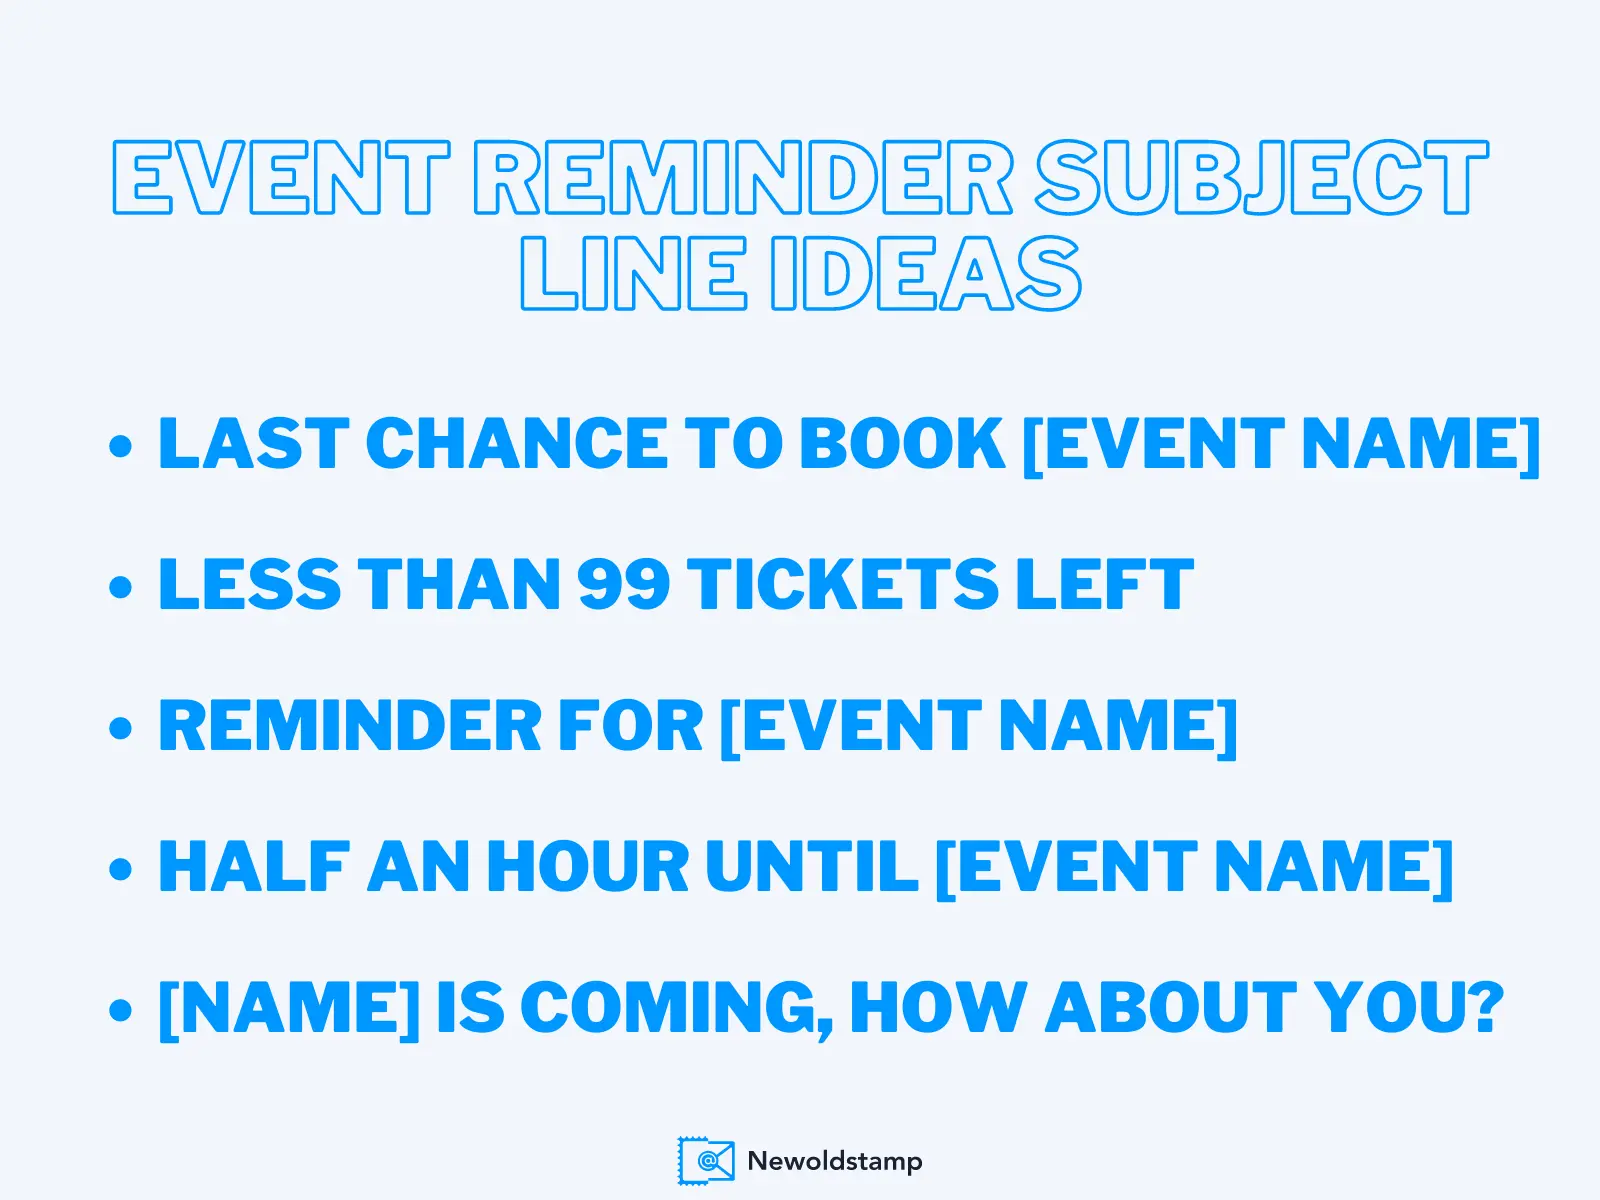 Subject line ideas for emails with event reminders